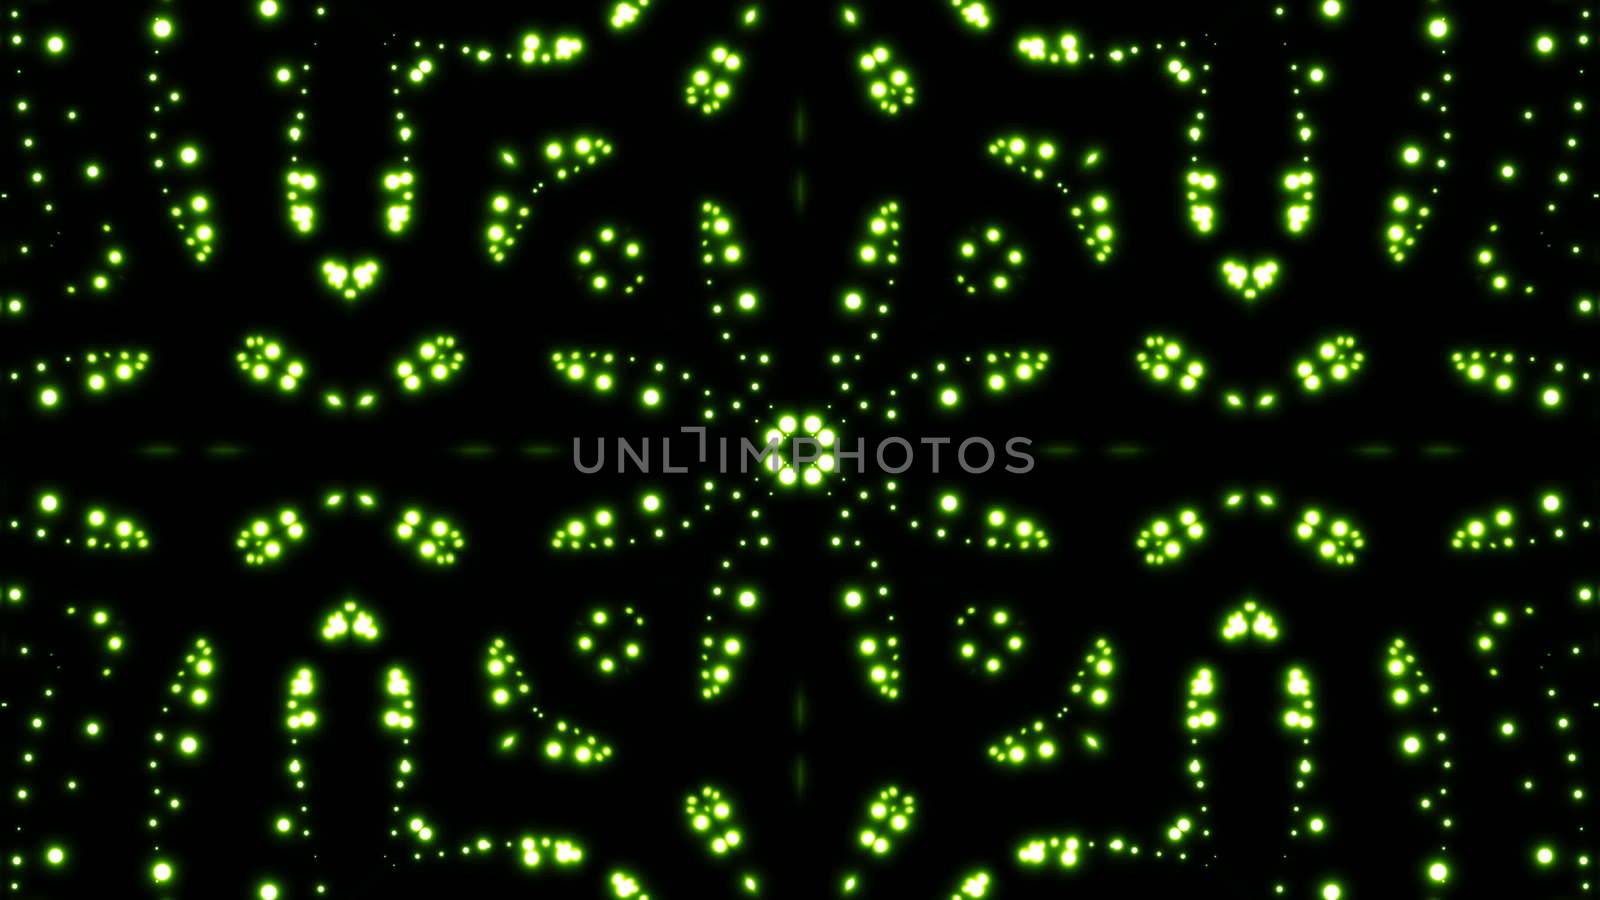 Glowing particles kaleidoscope with black background. Shining elements